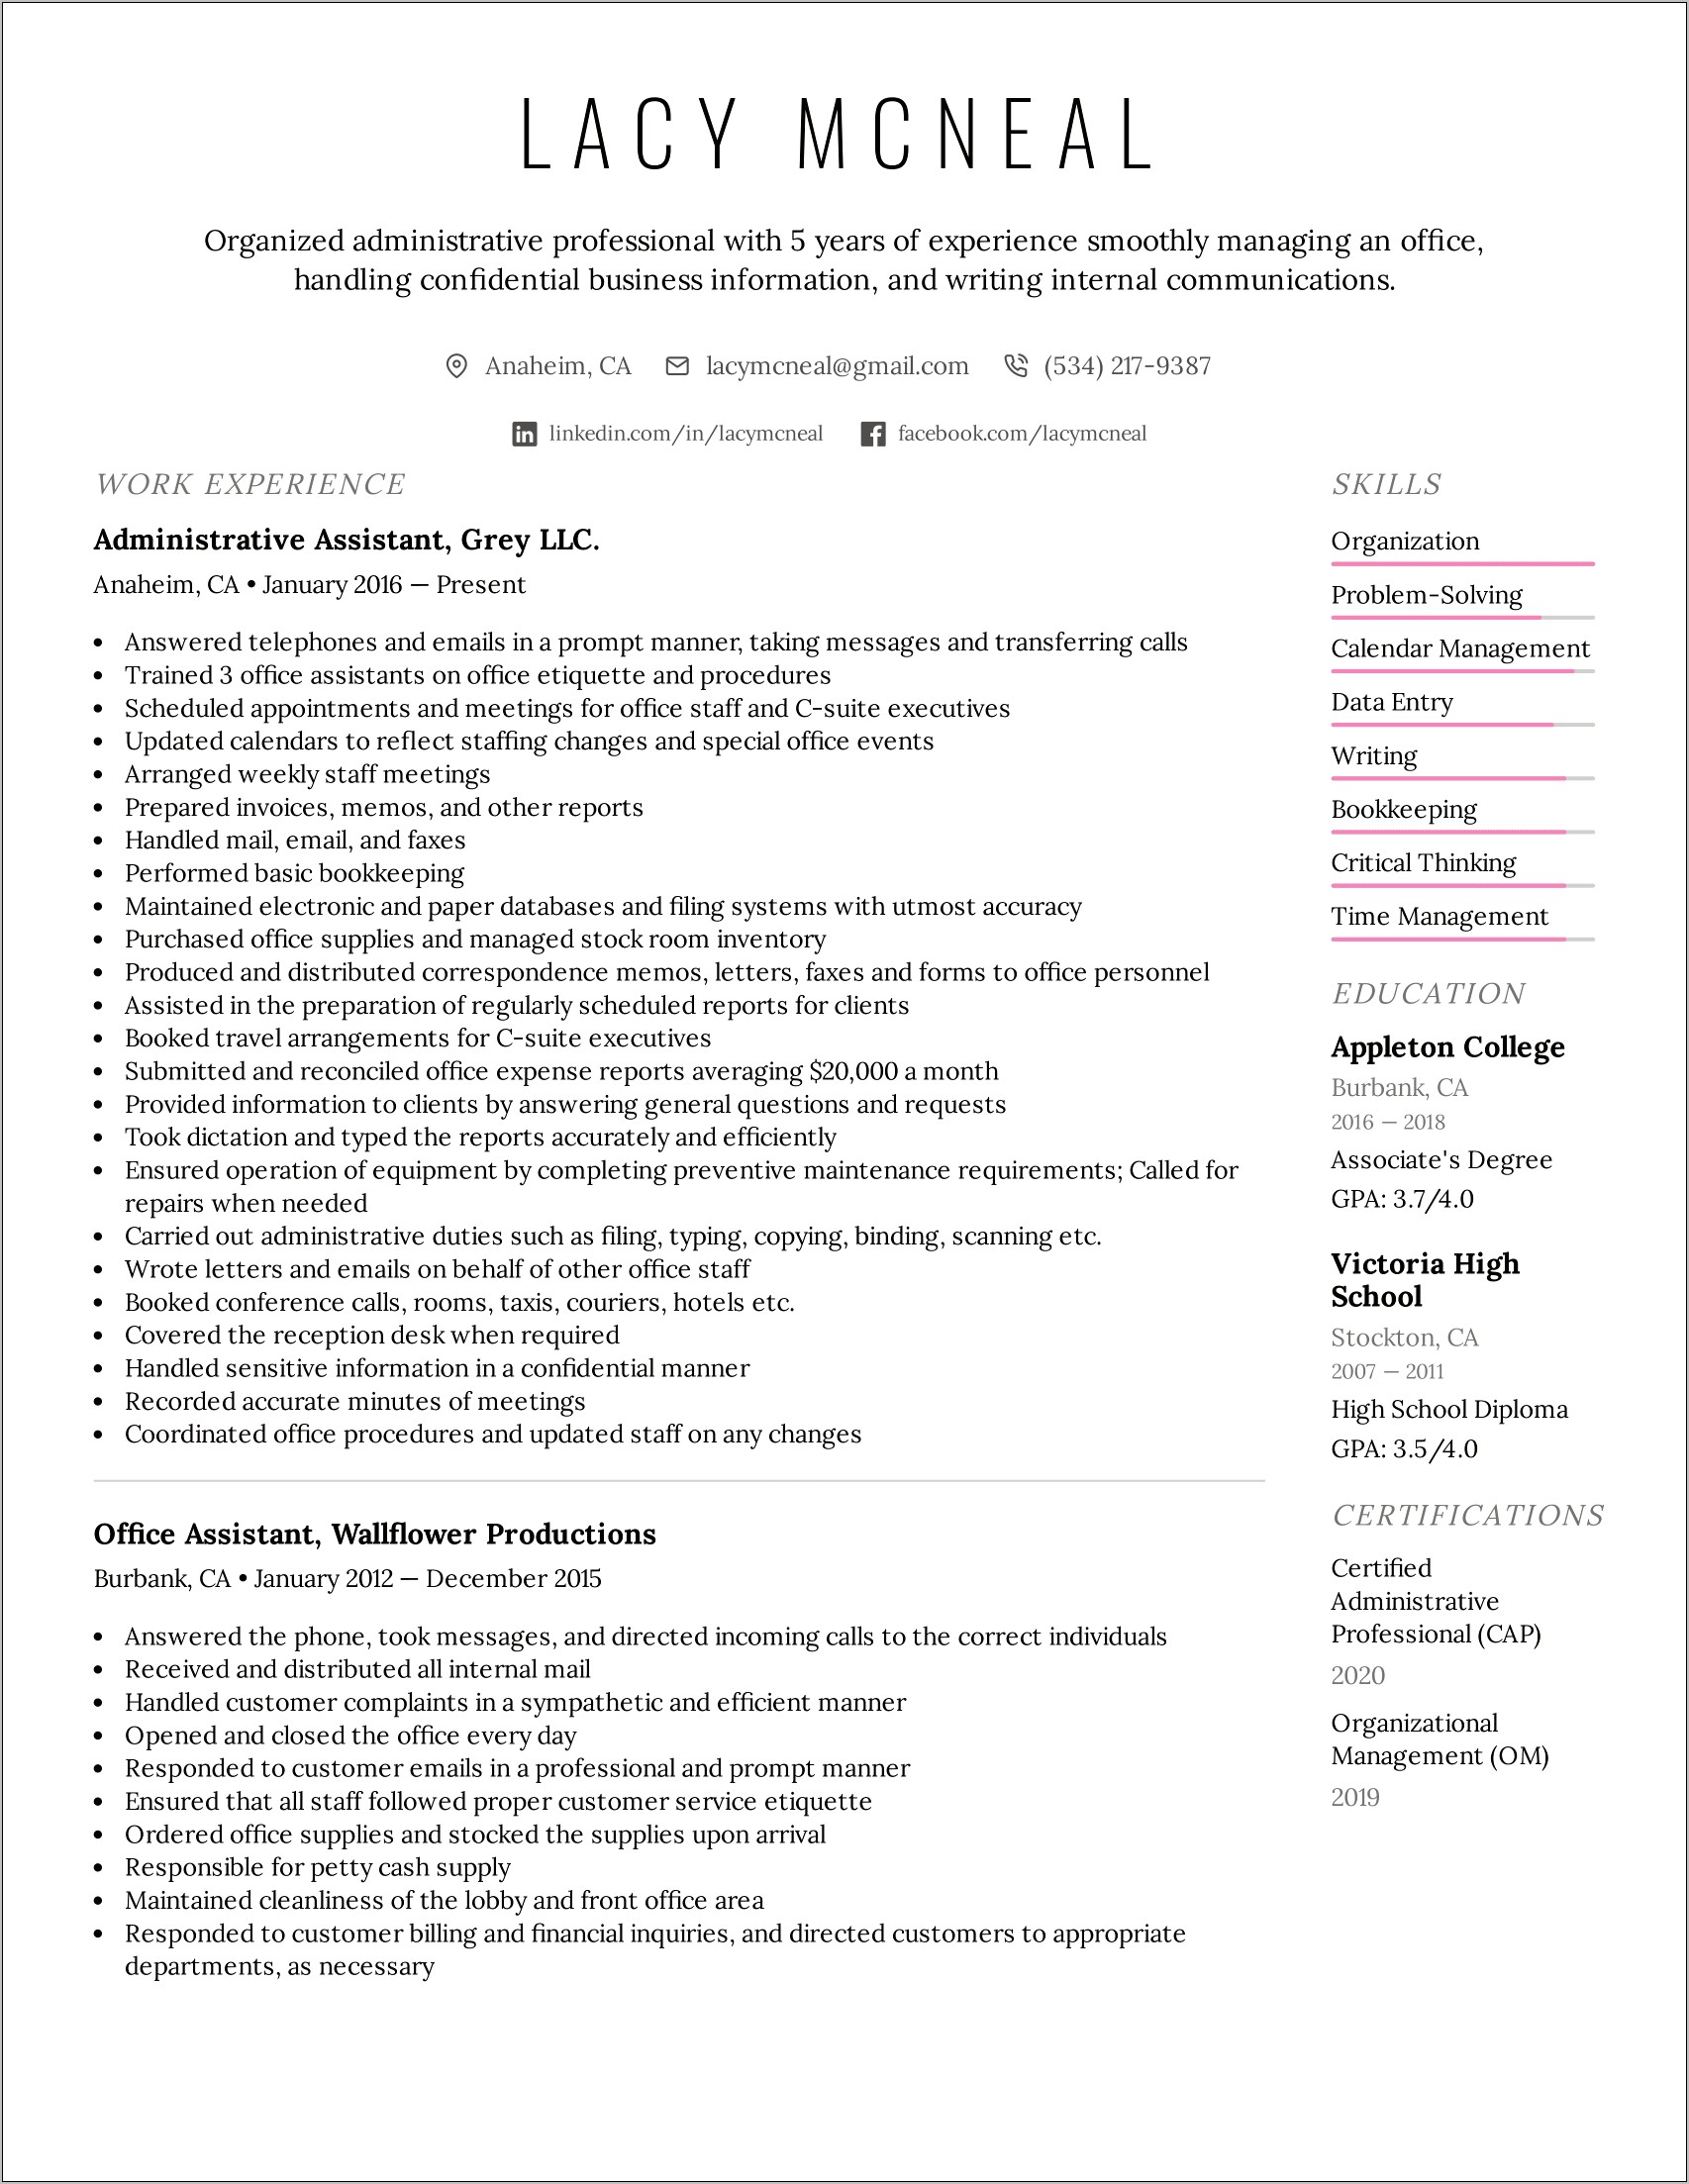 Administrative Assistant Technical Skills Resume